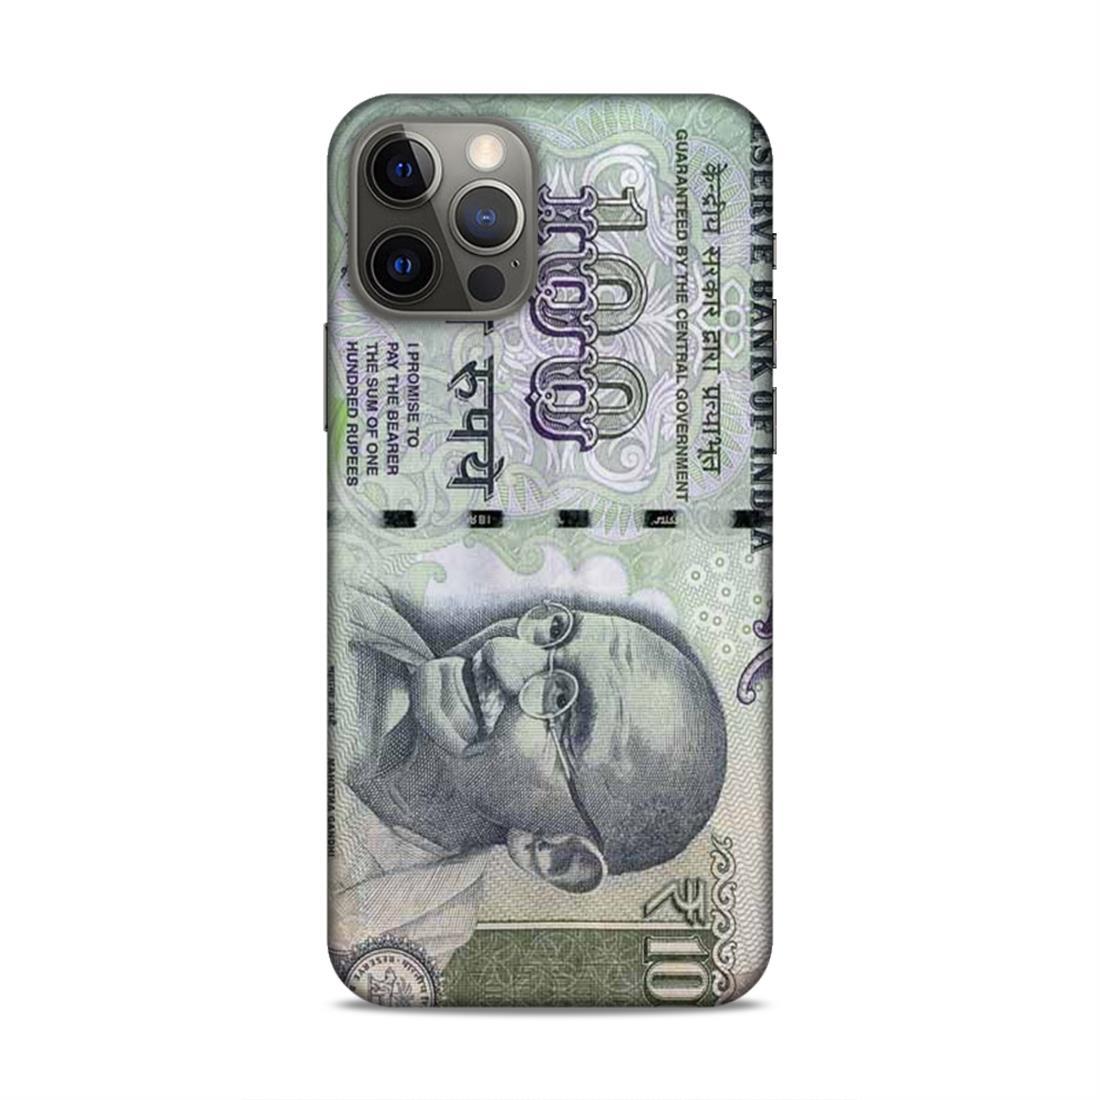 Rs 100 Currency Note iPhone 12 Pro Phone Cover Case